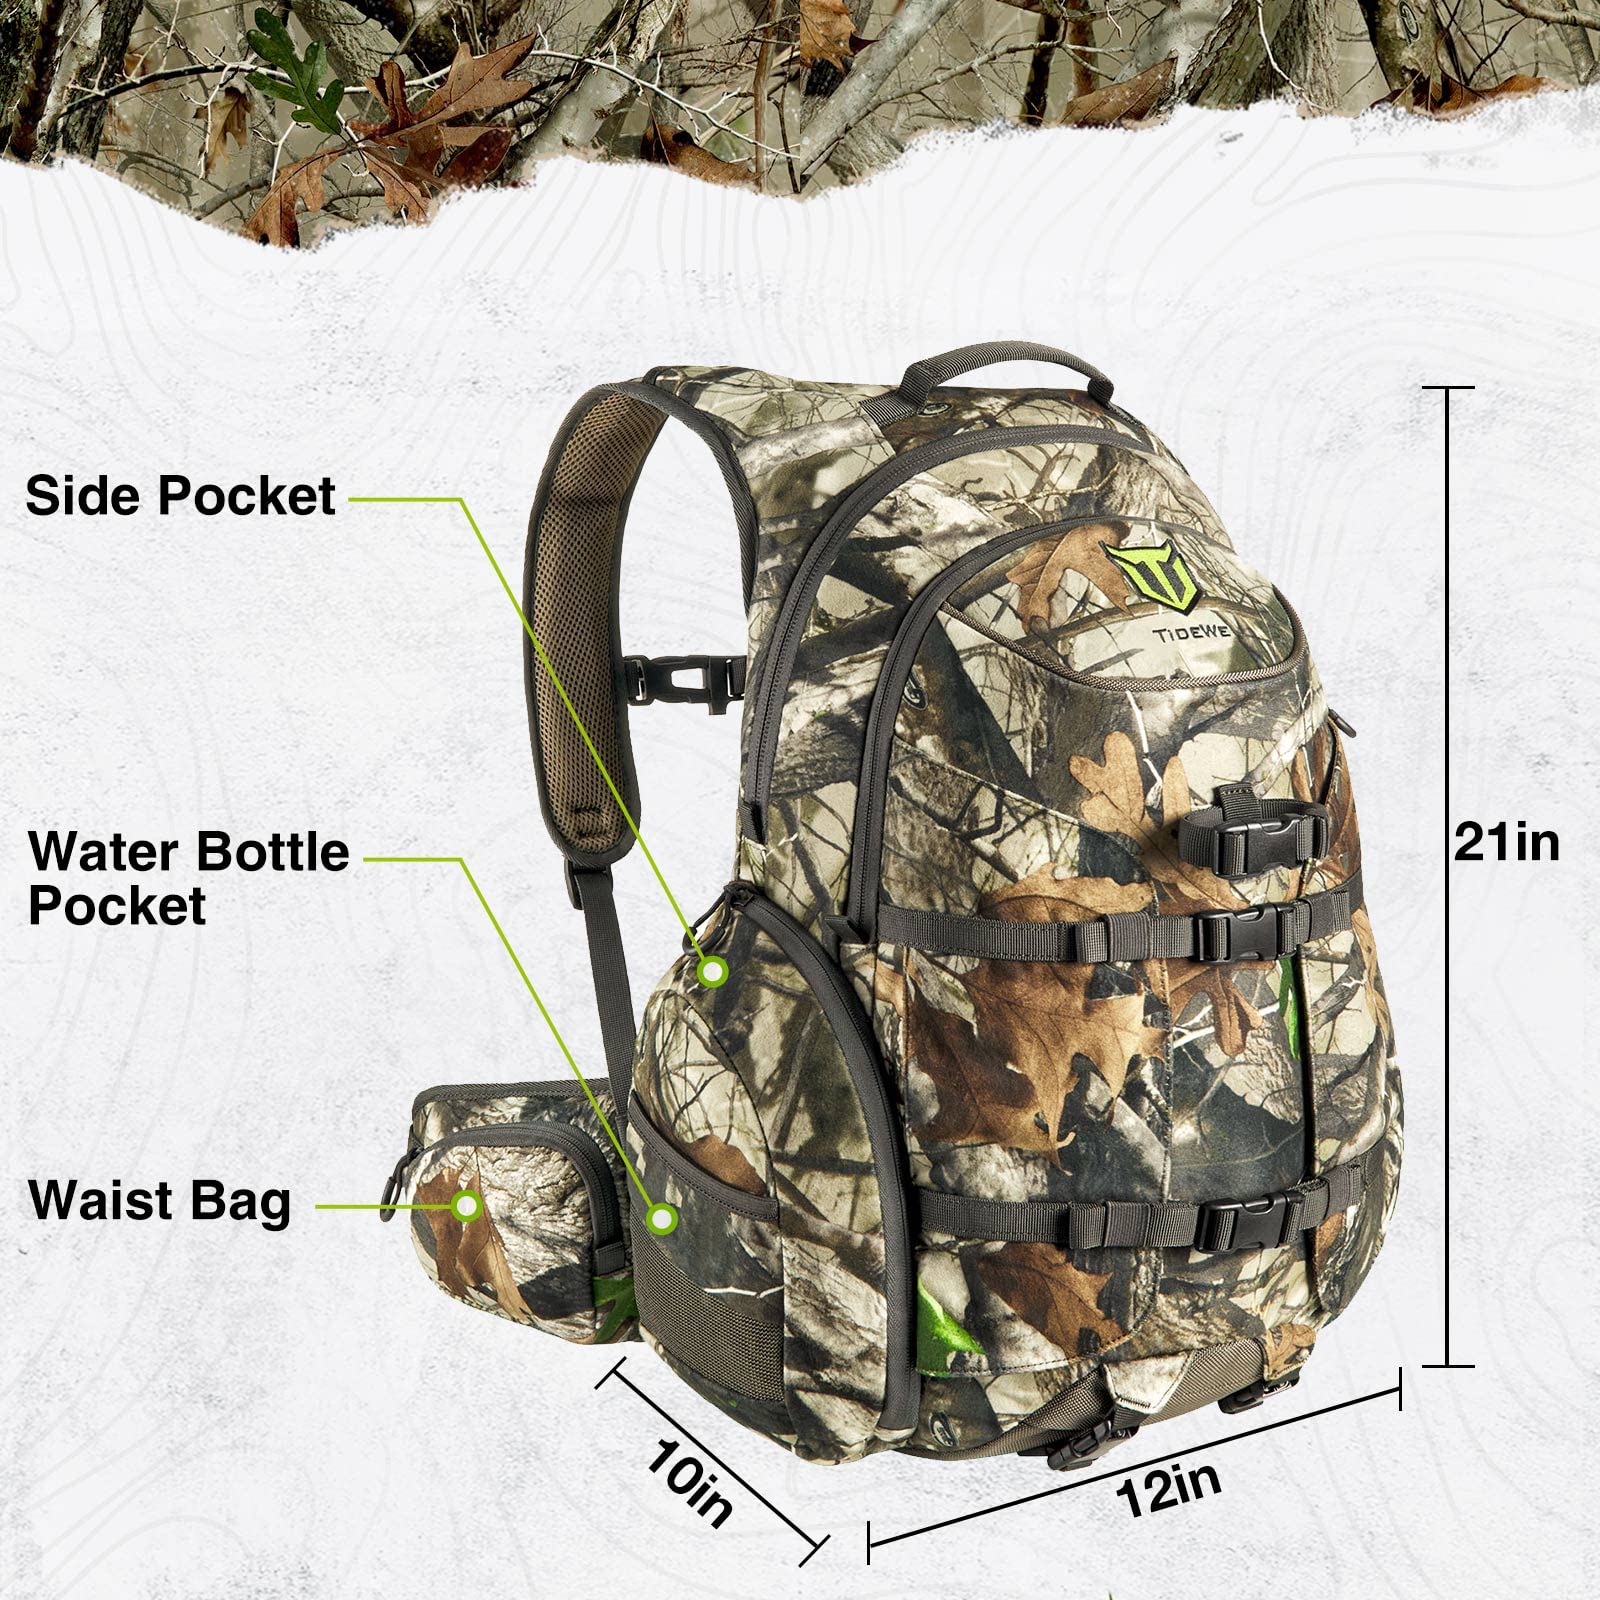 TIDEWE Hunting Backpack, Waterproof Camo Hunting Pack with Rain Cover, Durable Large Capacity Hunting Day Pack for Rifle Bow Gun (Next Camo G2)